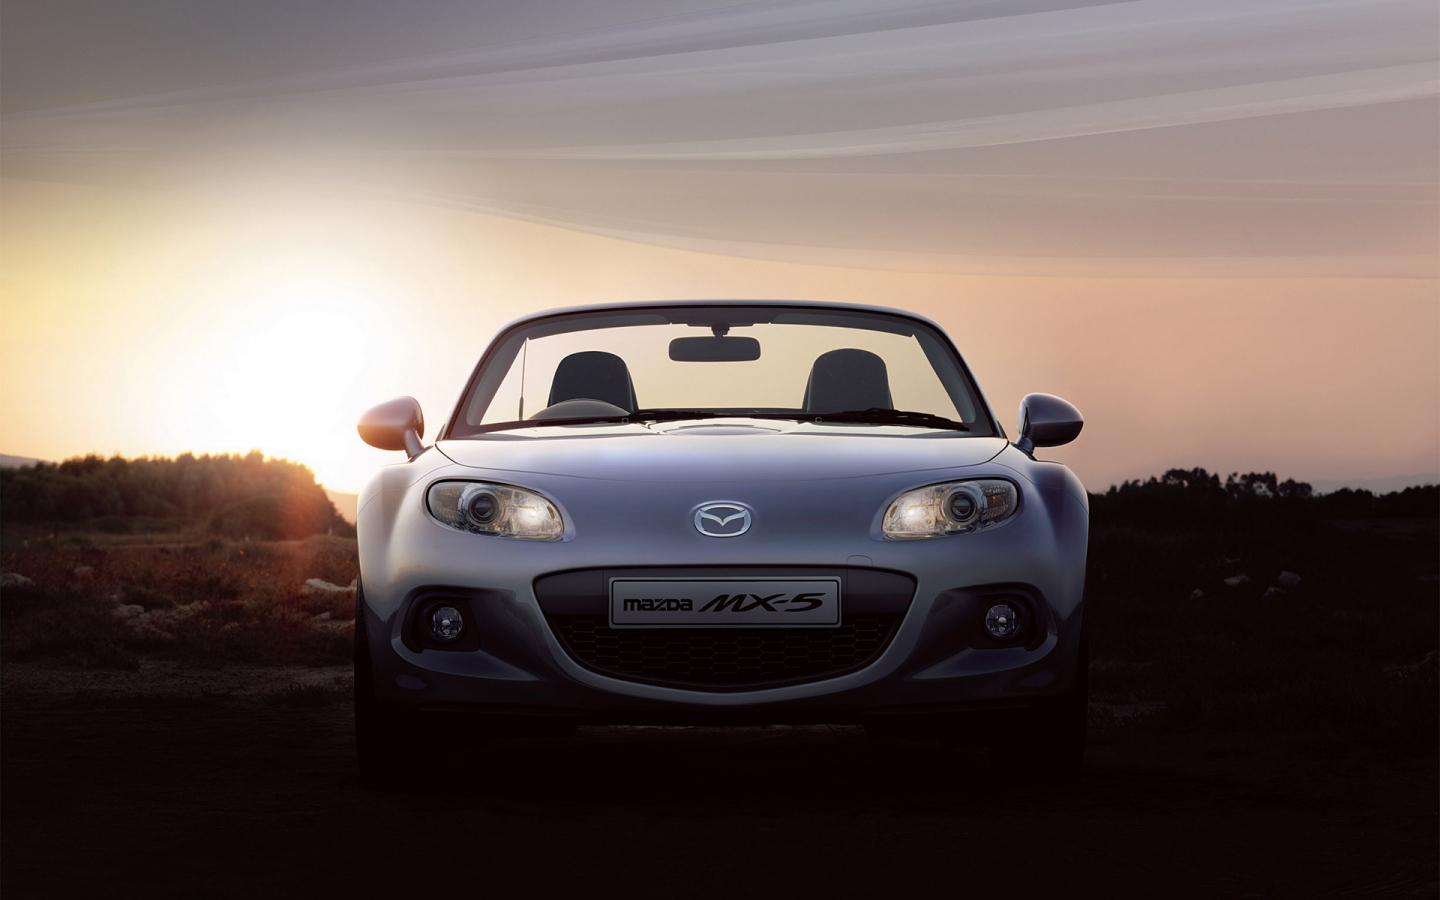 2013 Mazda MX 5 Roadster for 1440 x 900 widescreen resolution